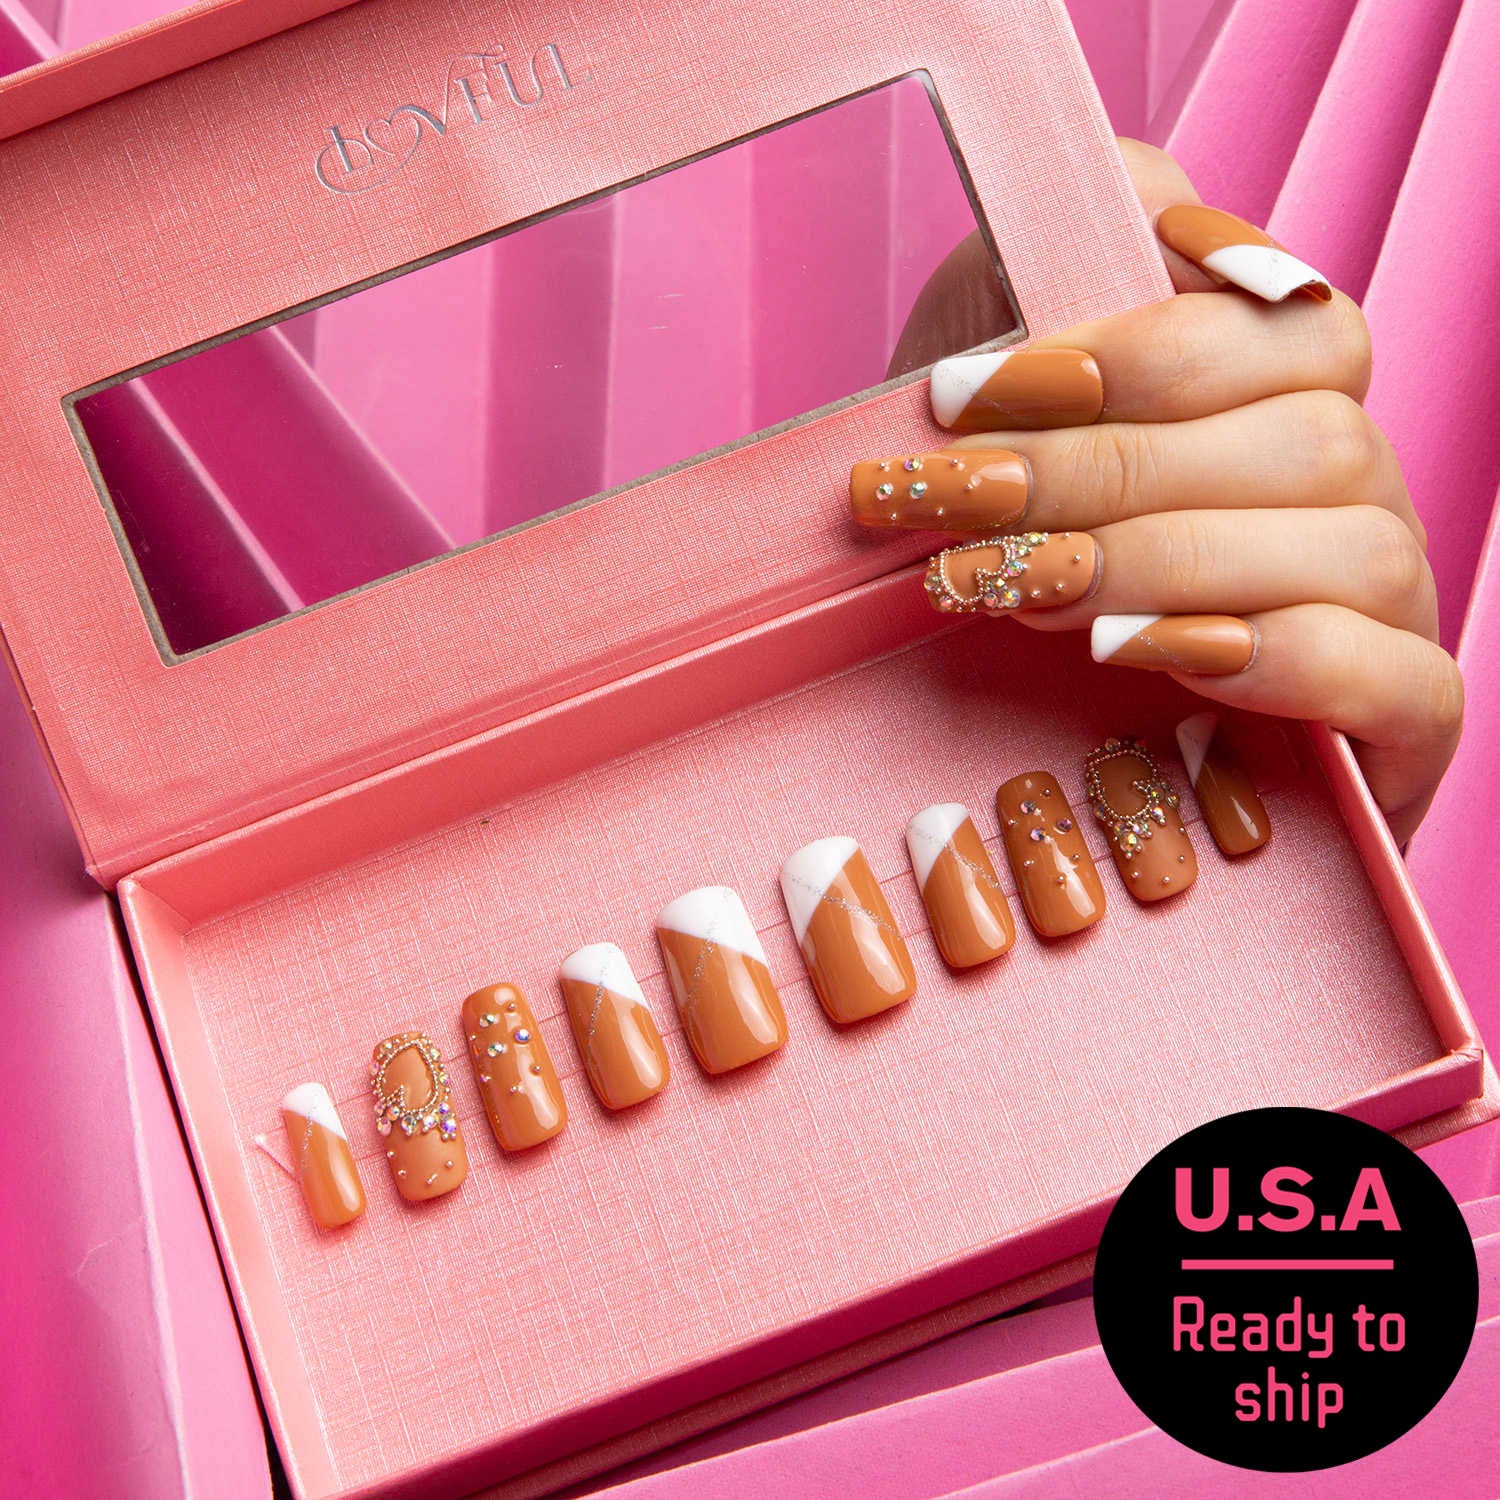 Lovful press-on nail set in a pink box, featuring light brown nails with white French tips and rhinestones. U.S.A Ready to ship.